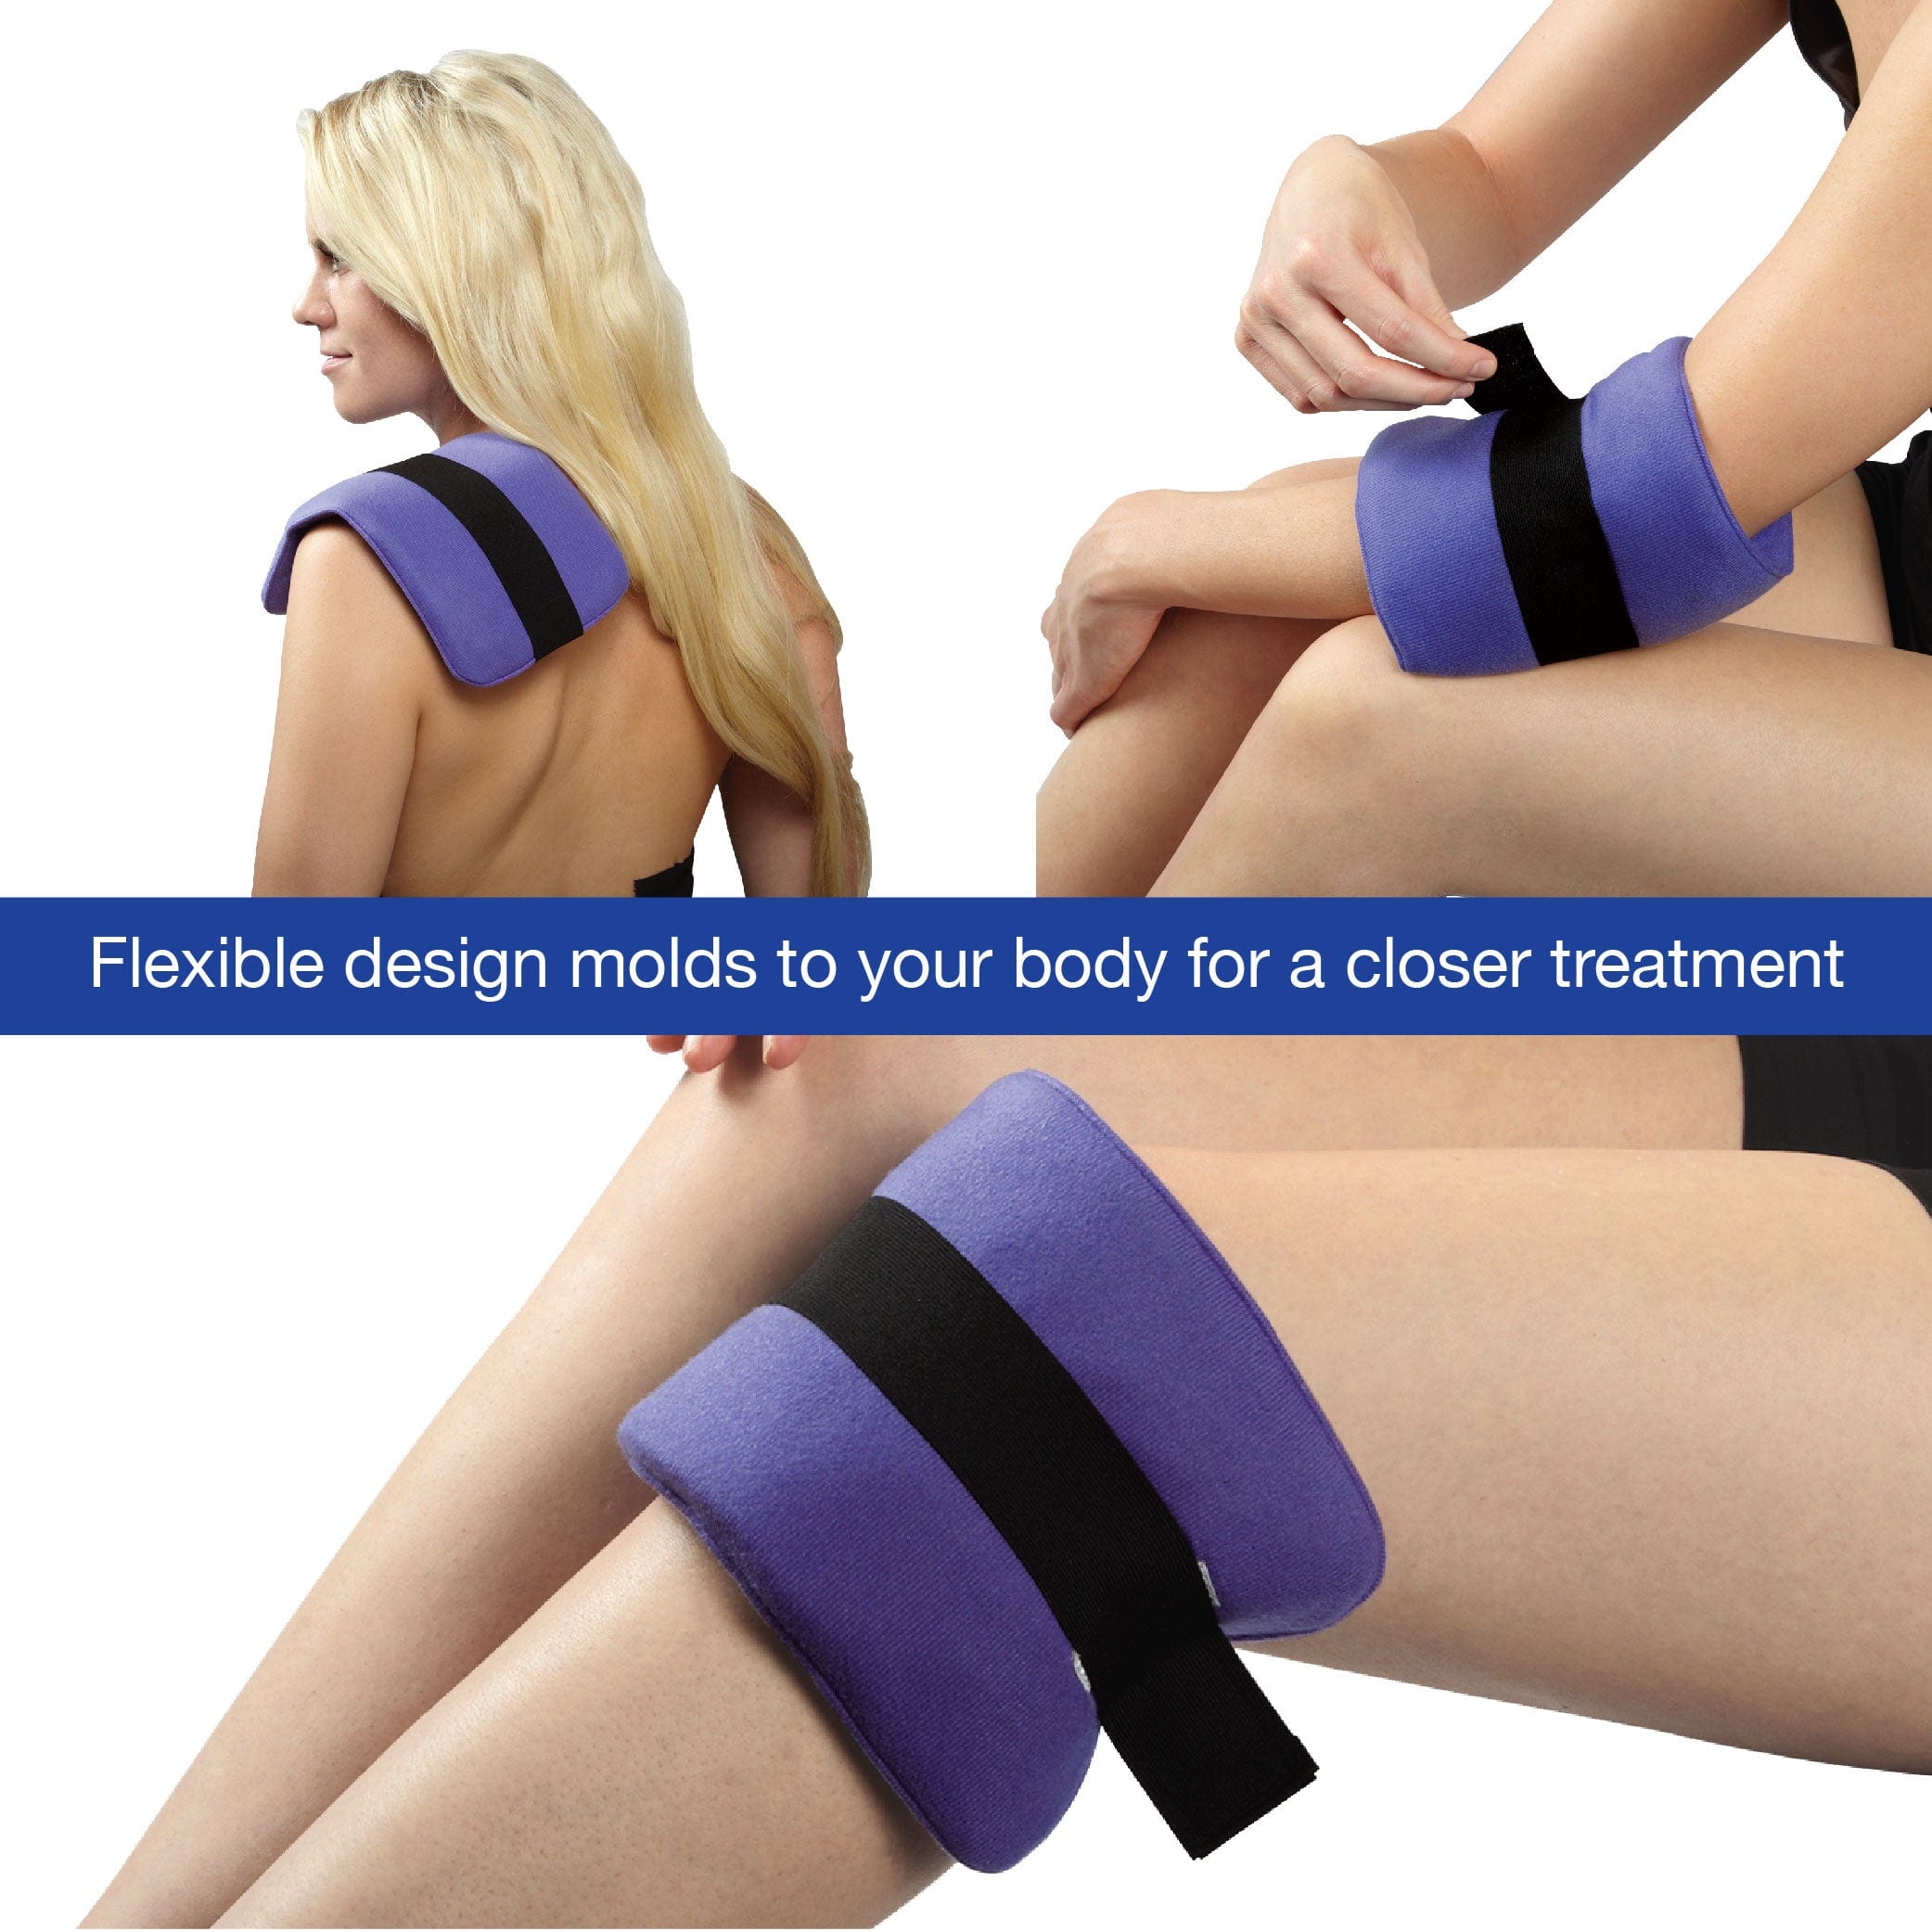 ThermiPaq Hot/Cold Pain Relief Wrap - Flexible design molds to your body for a closer treatment